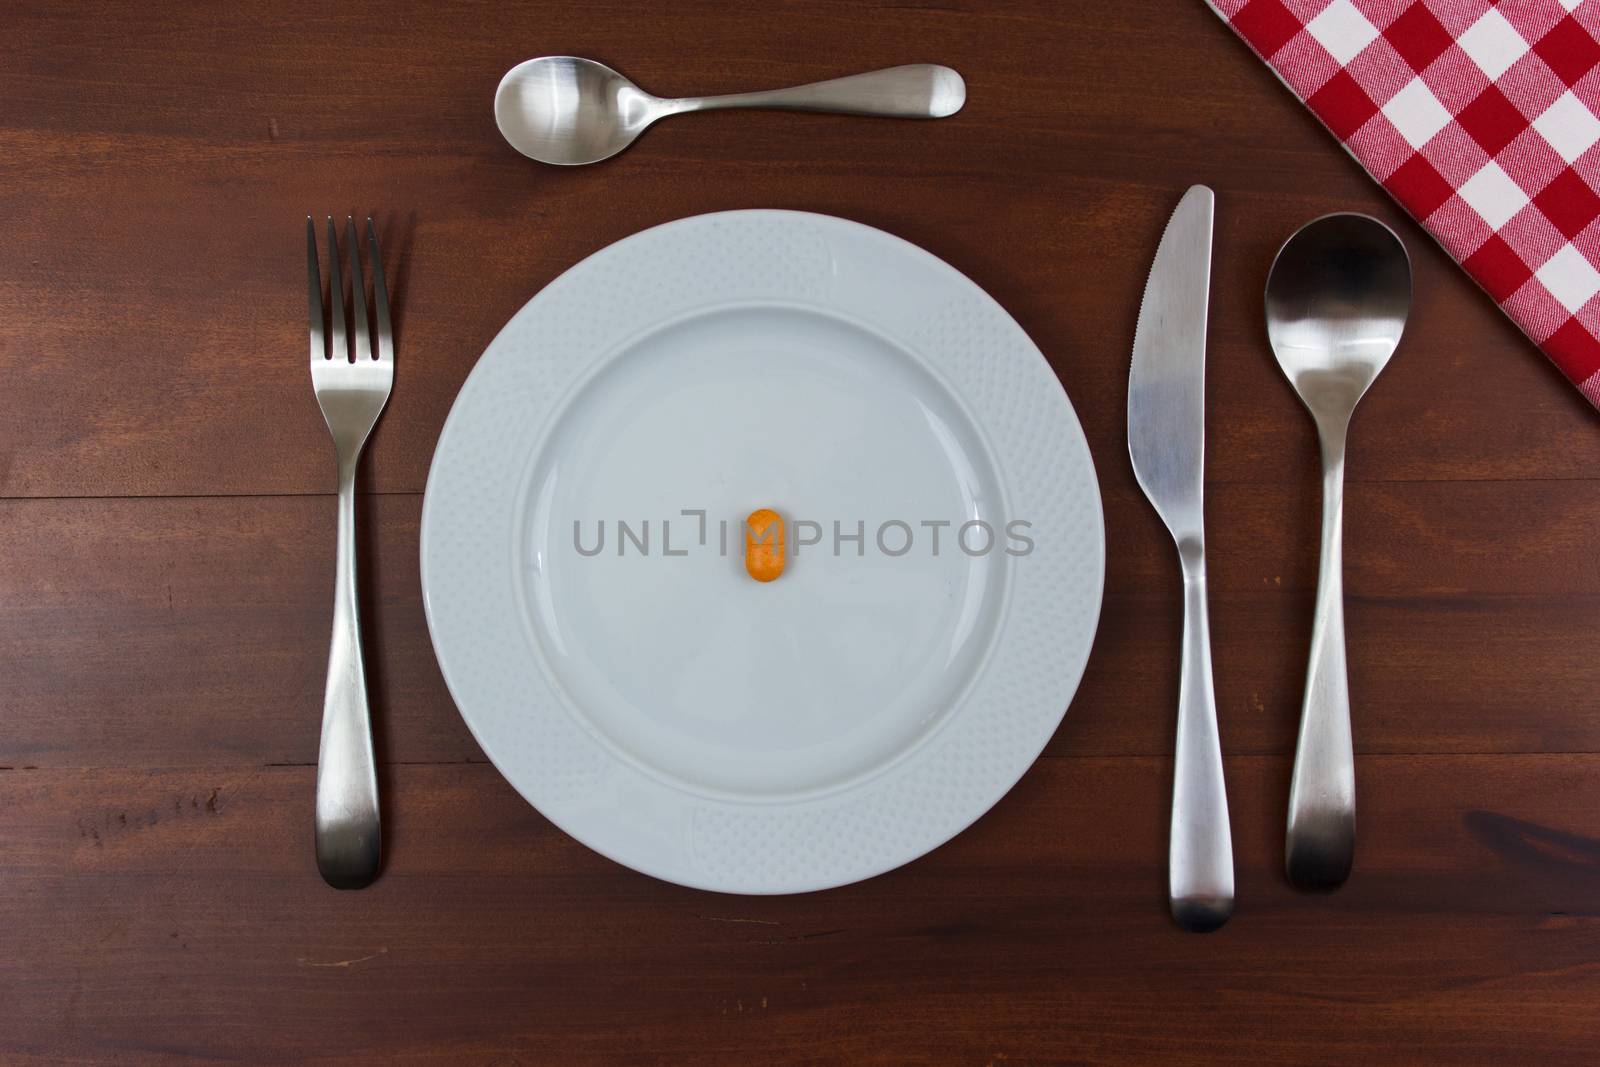 white dish with cutlery and pills on wooden table